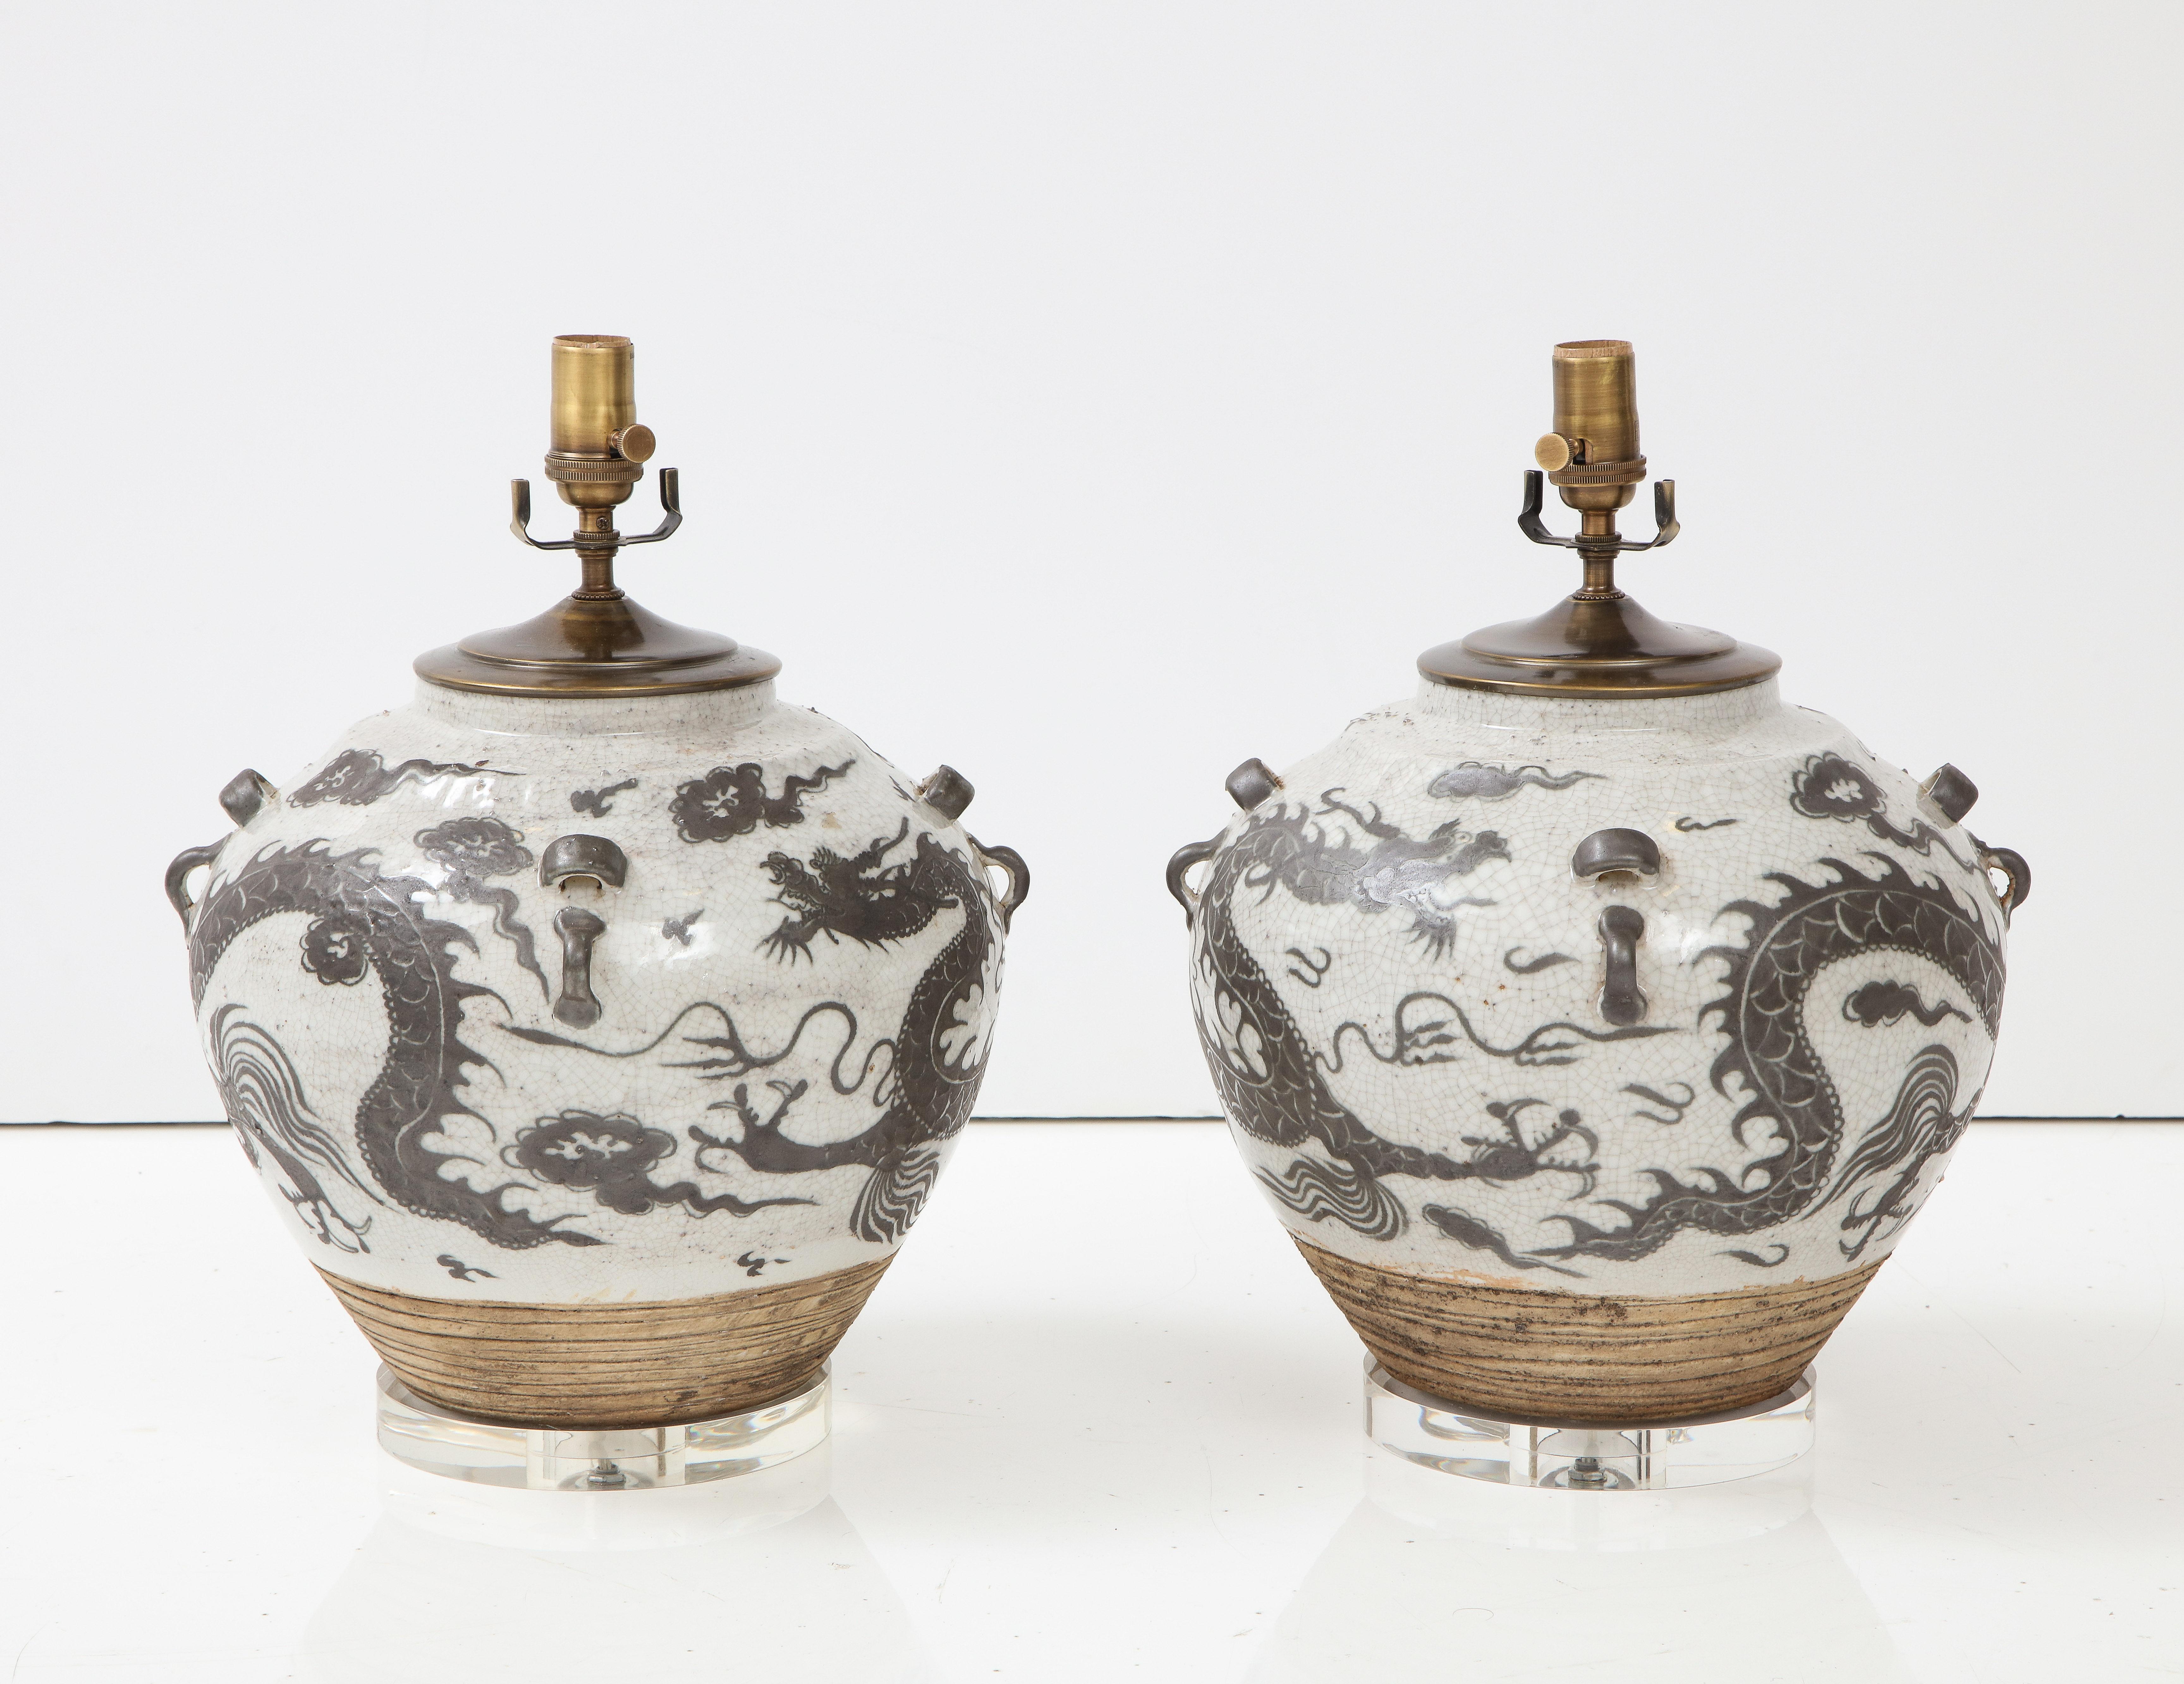 A pair of Chinese export jugs converted to lamps on a lucite base. The lamps have a unique shape that sets them apart from other lamps and they are decorated with a dragon motif in a deep gray color.